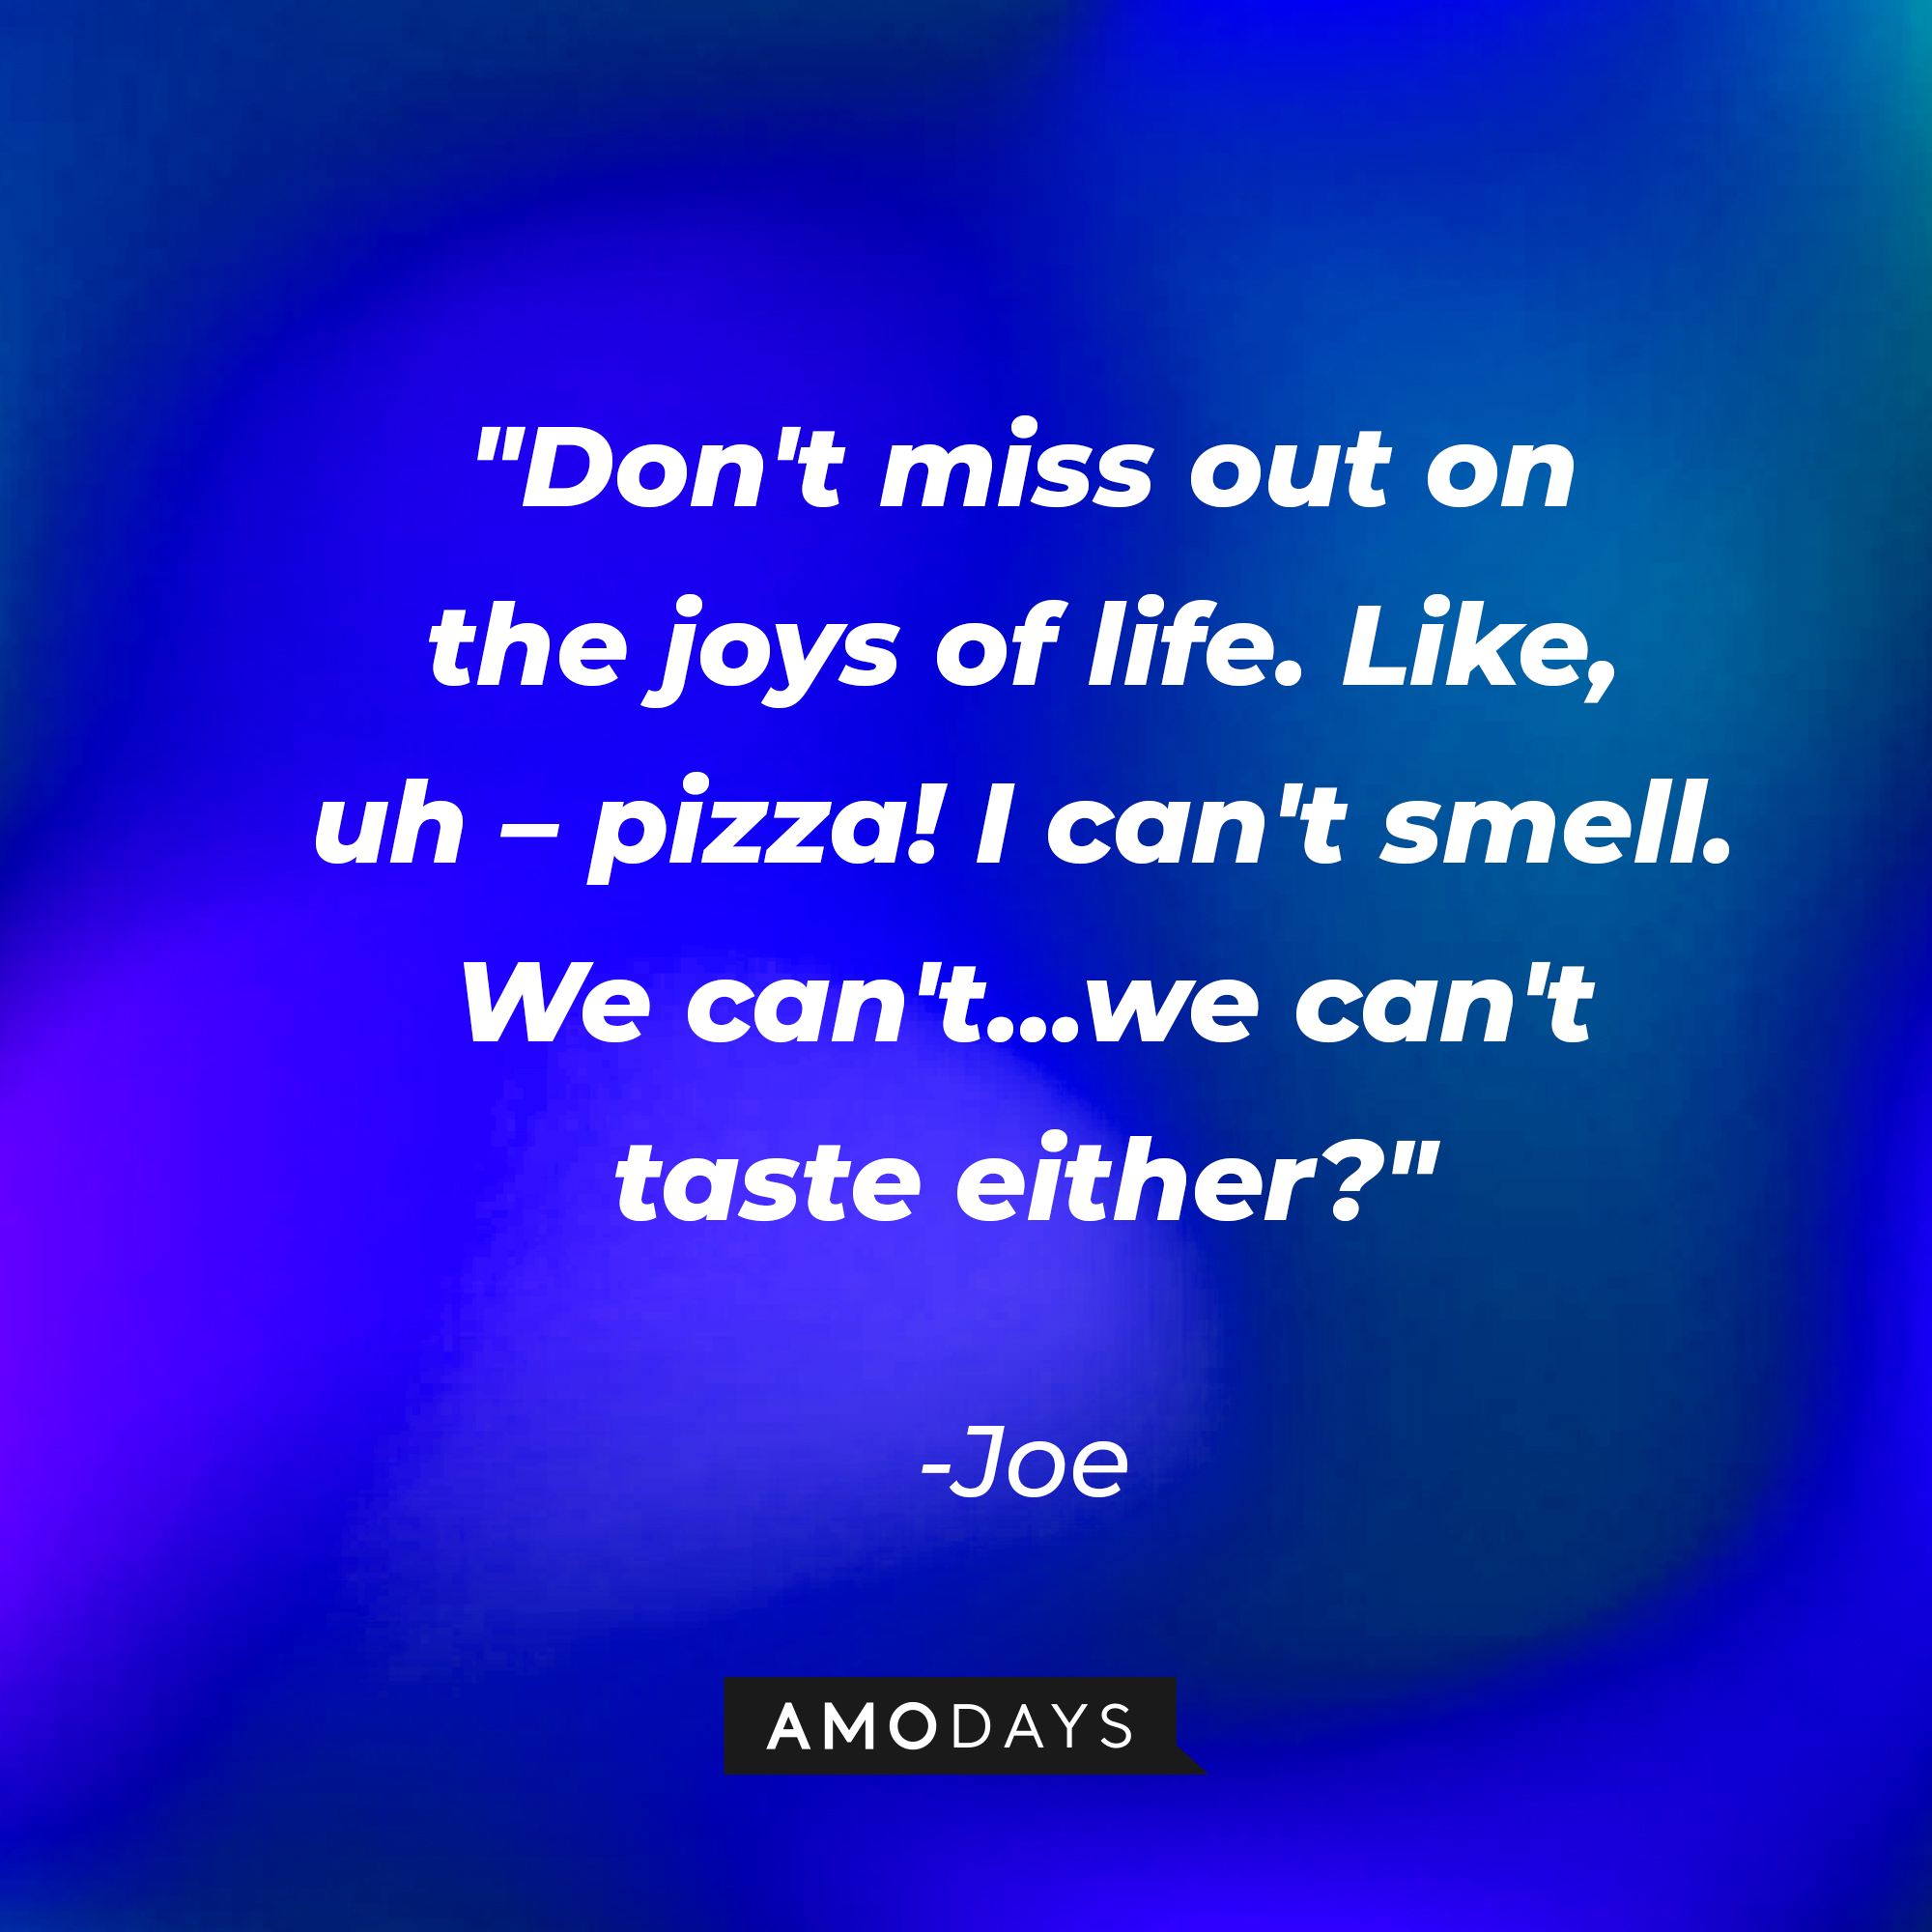 Joe's quote: "Don't miss out on the joys of life. Like, uh – pizza! I can't smell. We can't…we can't taste either?" | Source: youtube.com/pixar